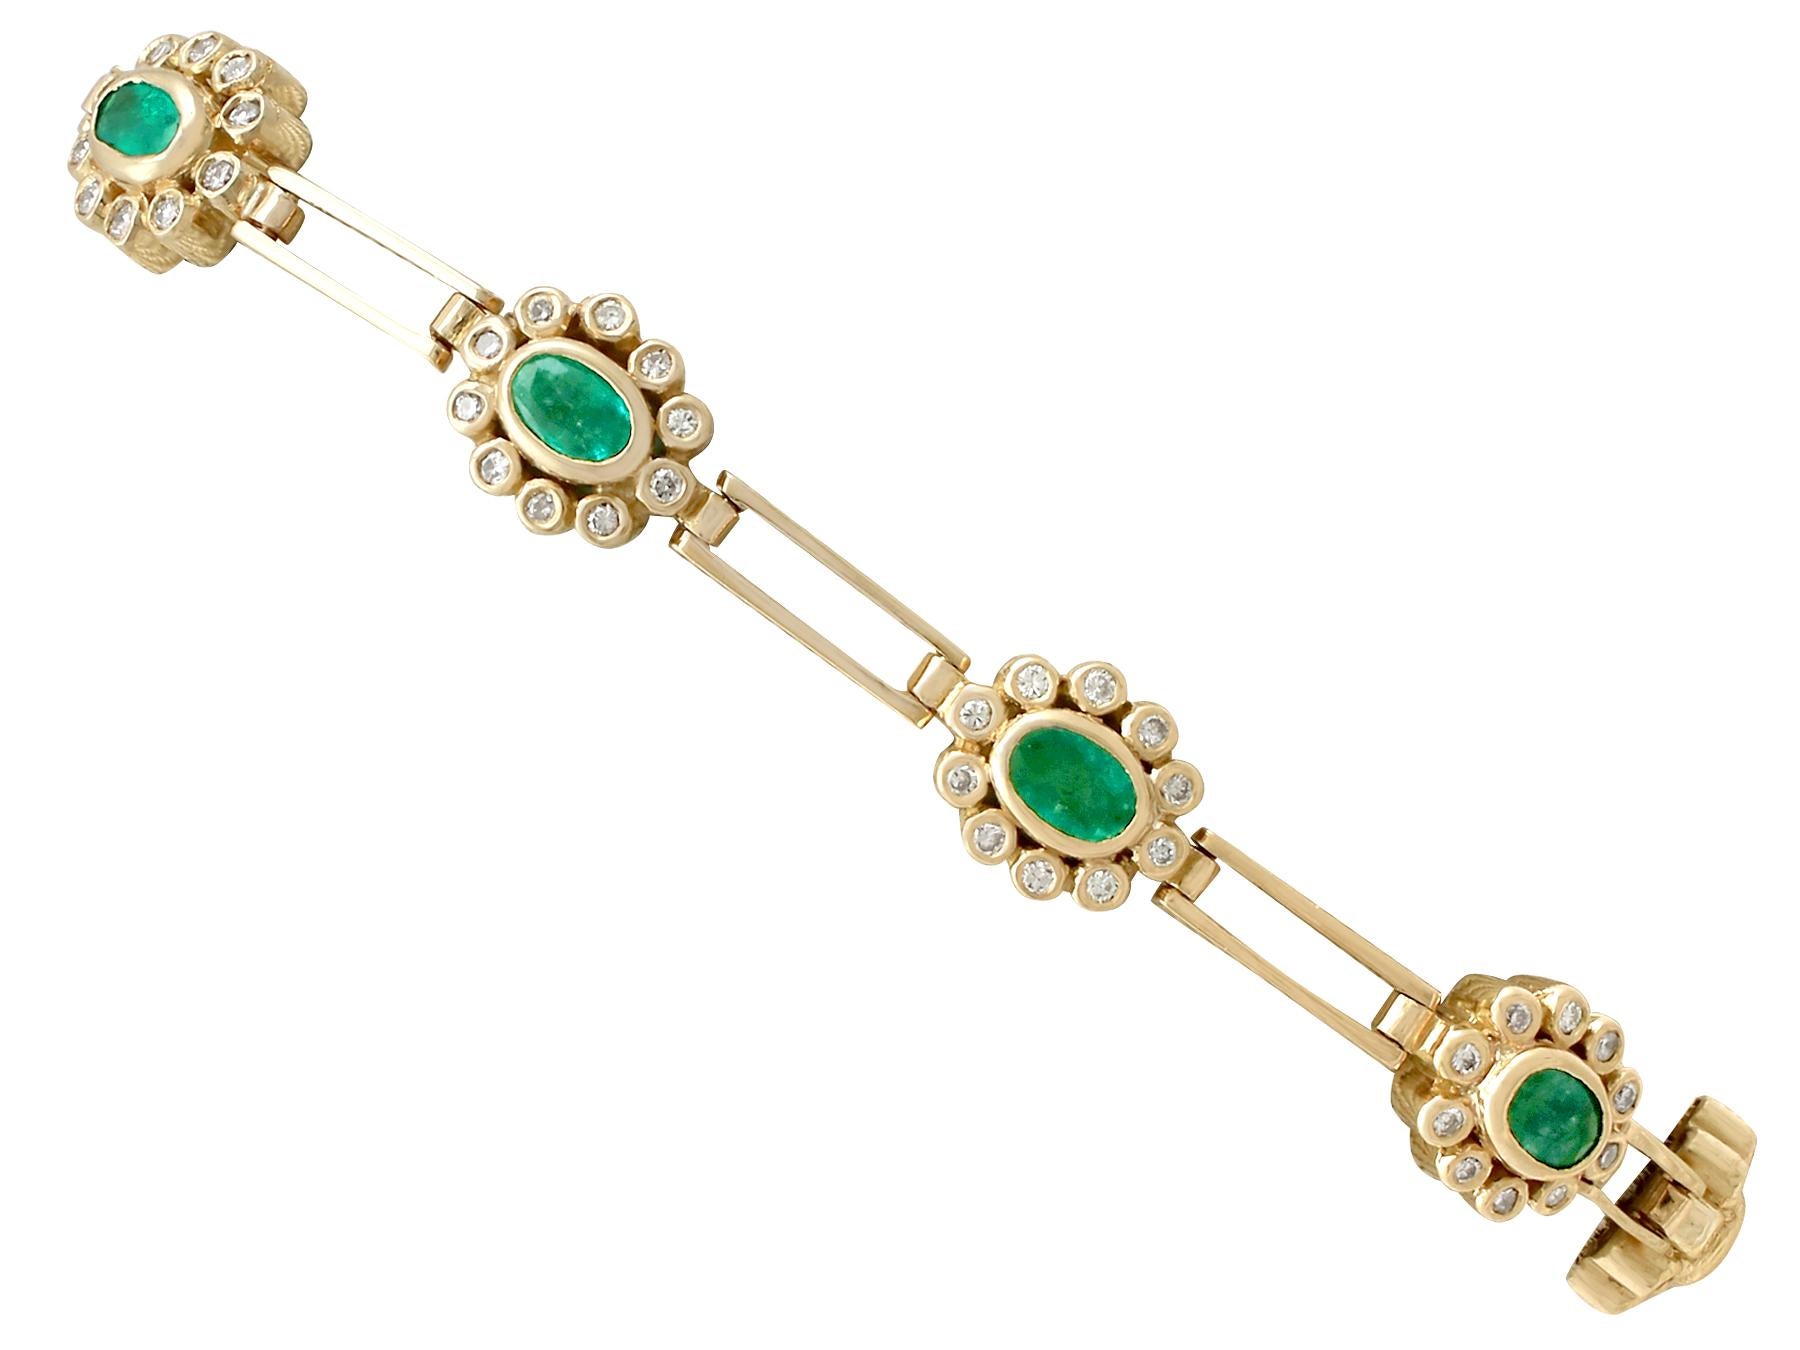 An impressive vintage 2.85 carat emerald and 2.25 carat diamond, 18k yellow gold bracelet; part of our diverse gemstone jewelry collections.

This fine and impressive emerald and diamond bracelet has been crafted in 18k yellow gold.

The bracelet is